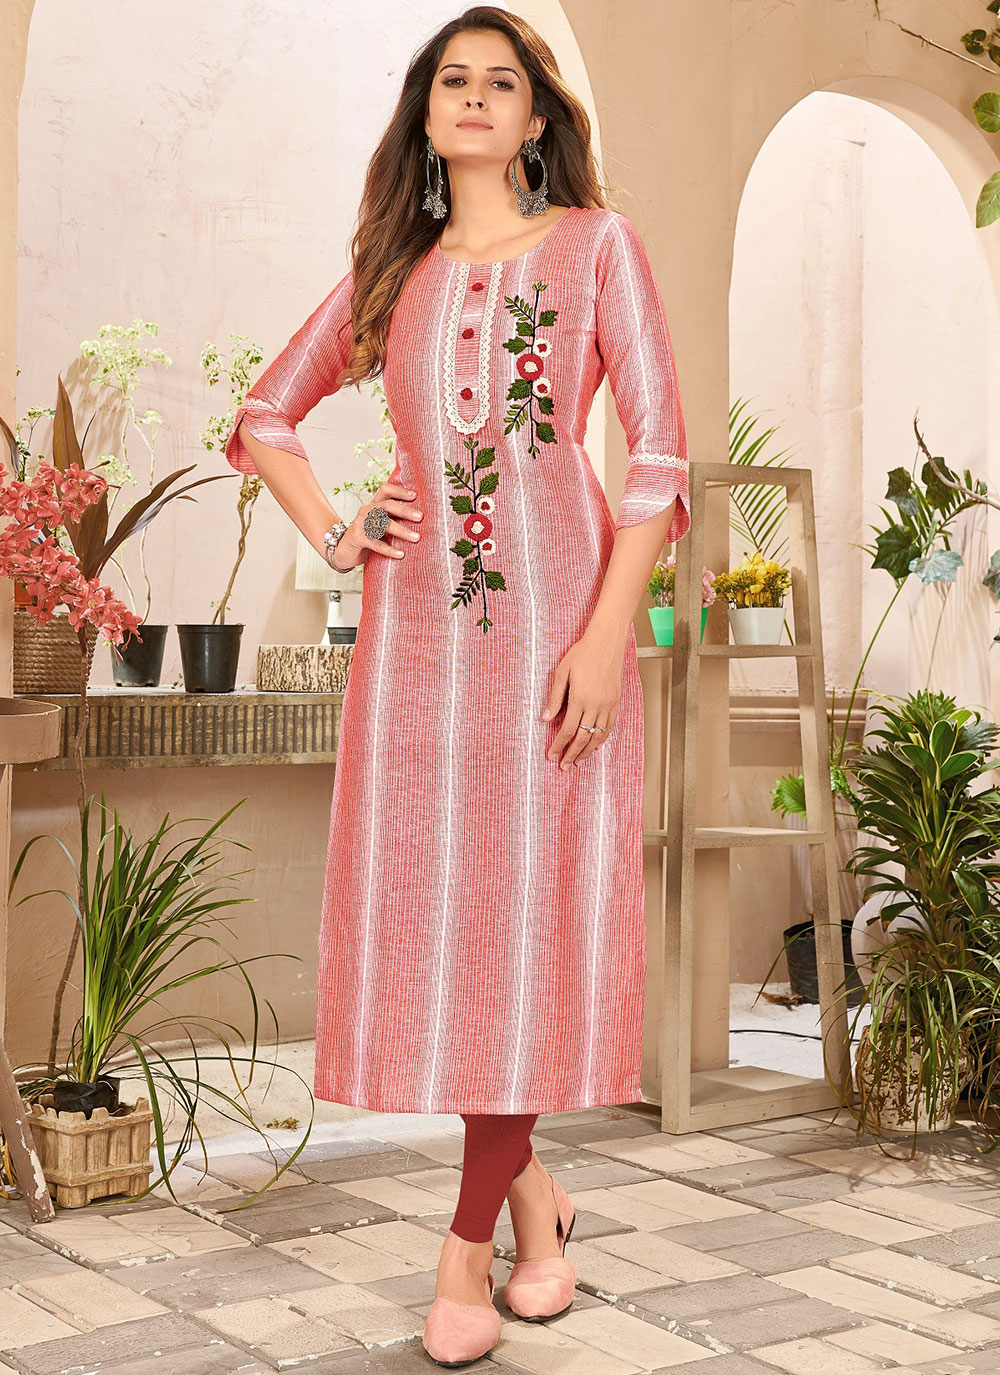 Update more than 83 floral embroidery designs for kurtis super hot - POPPY